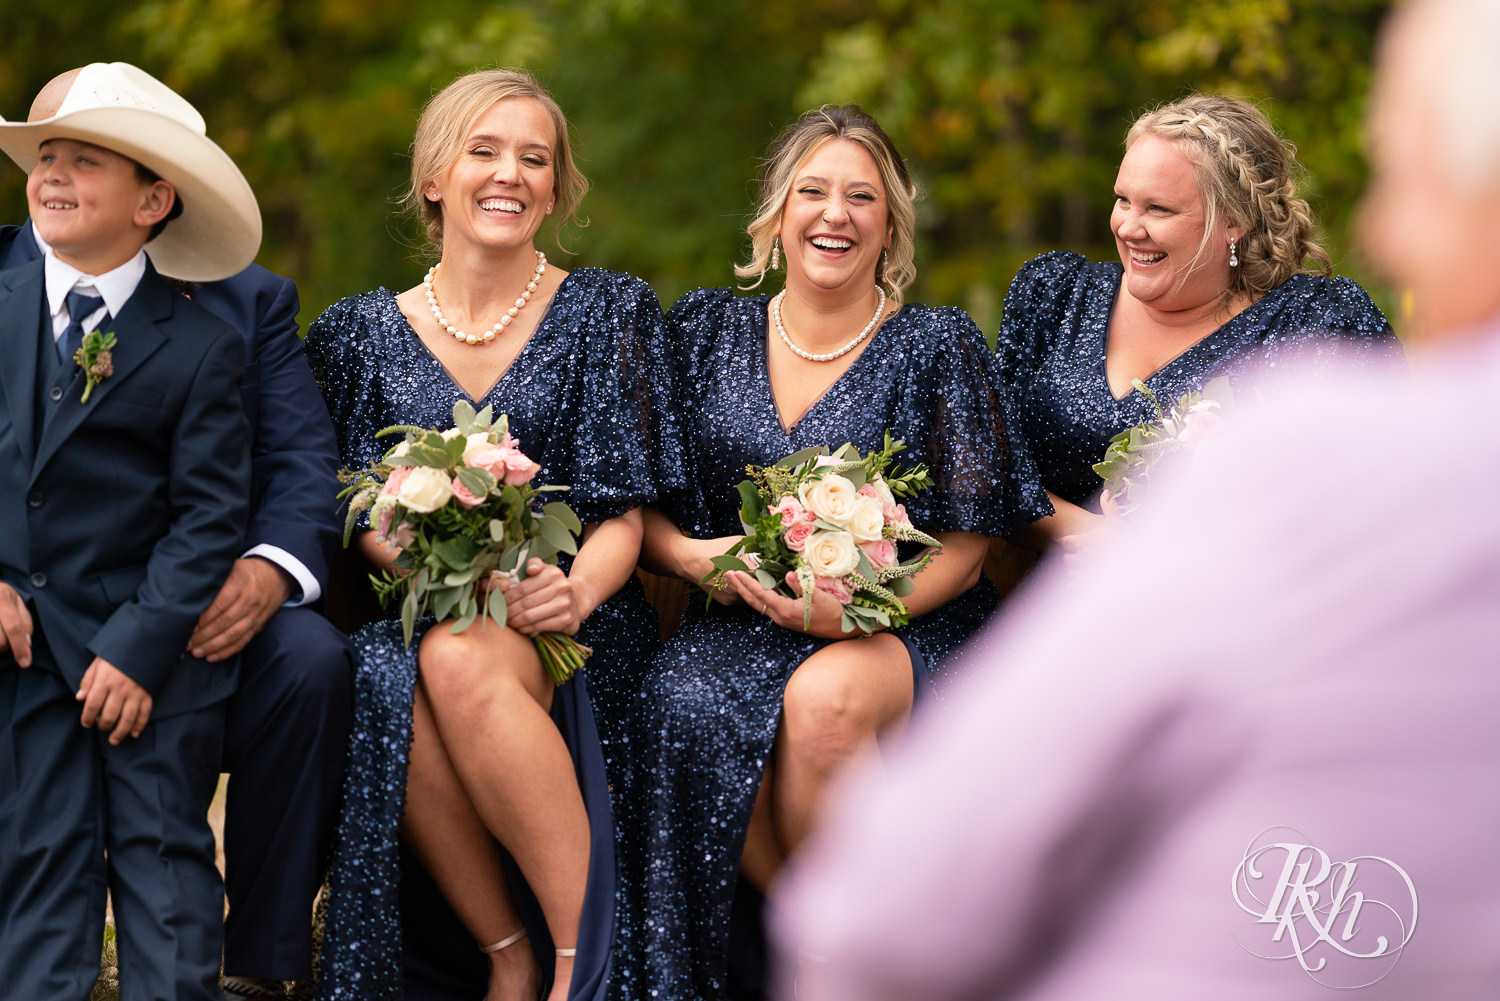 Bridesmaids laughing candidly at wedding in Belle Plaine, Minnesota.